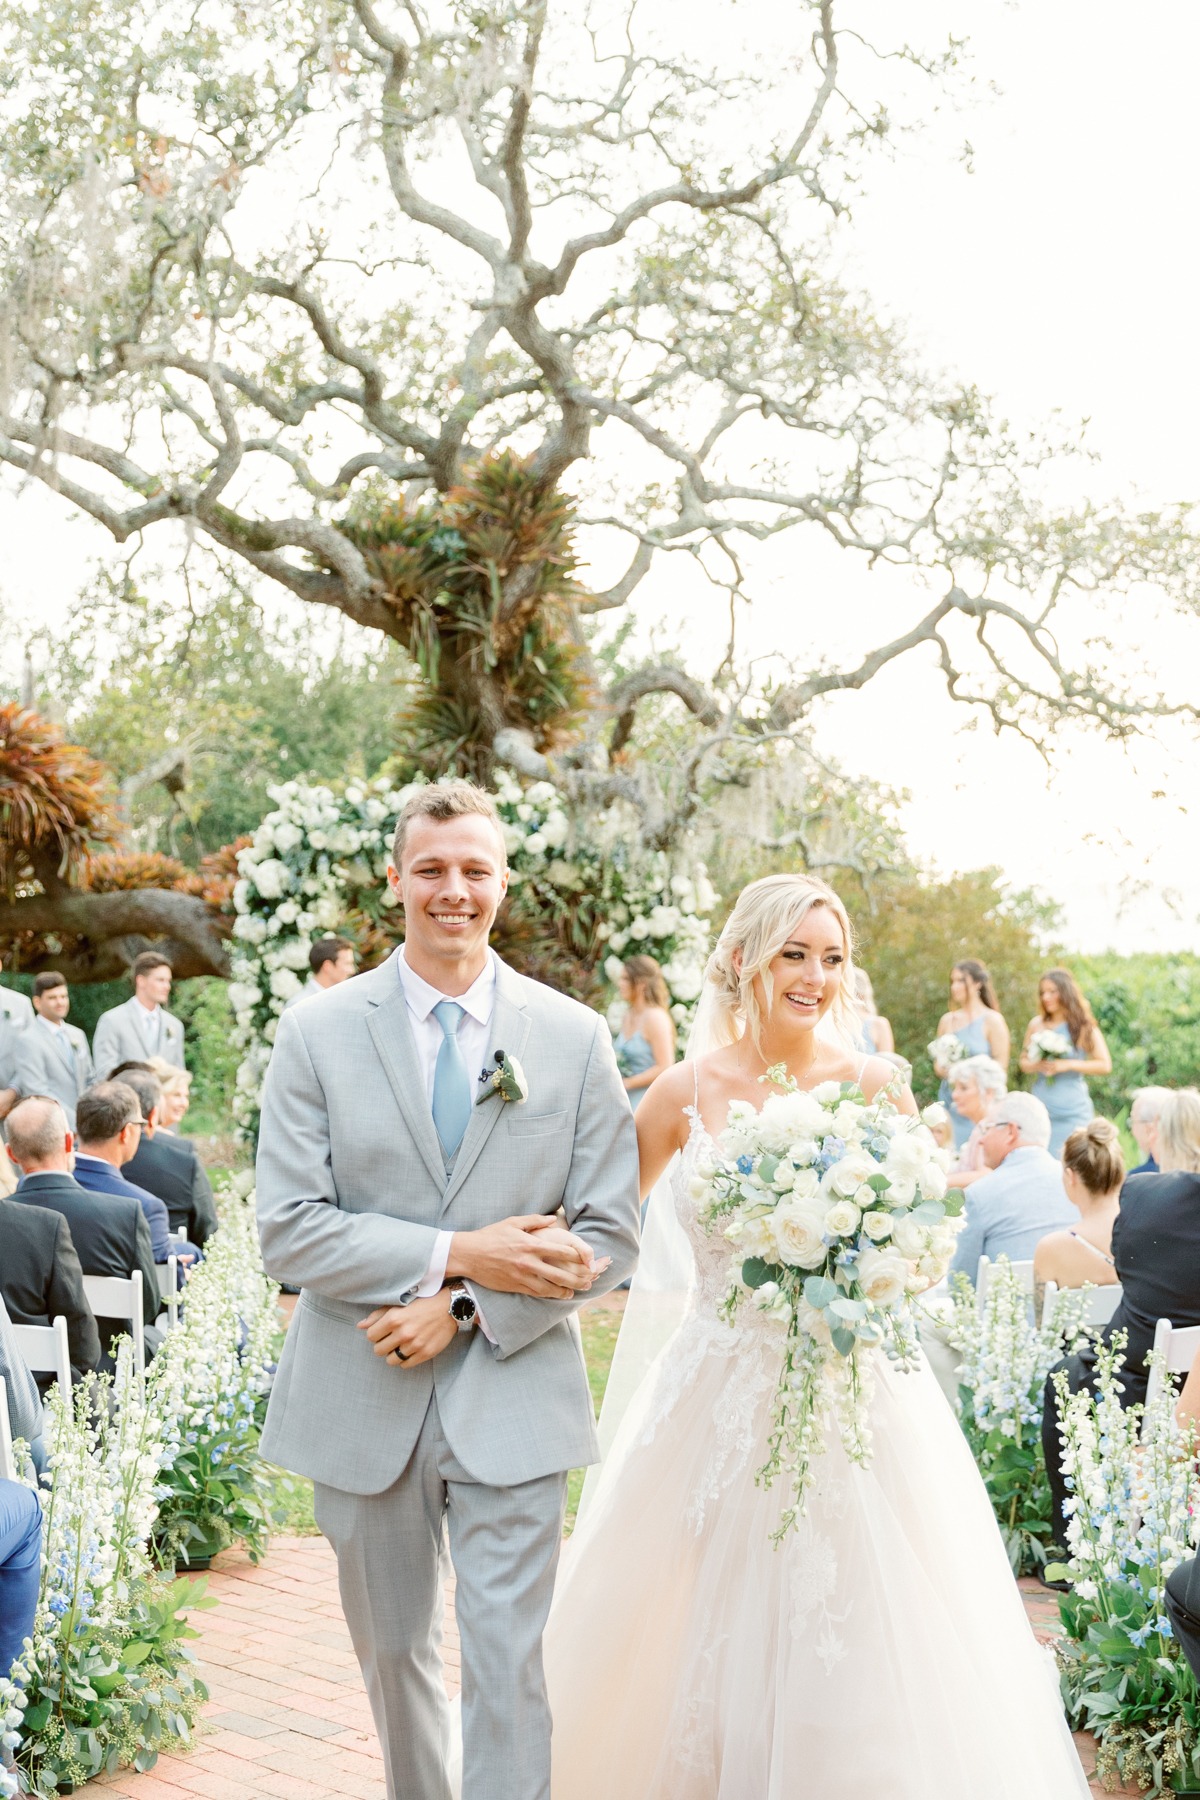 Lovely Pastel Garden Wedding With A Surprise Cake-Cutting Reveal